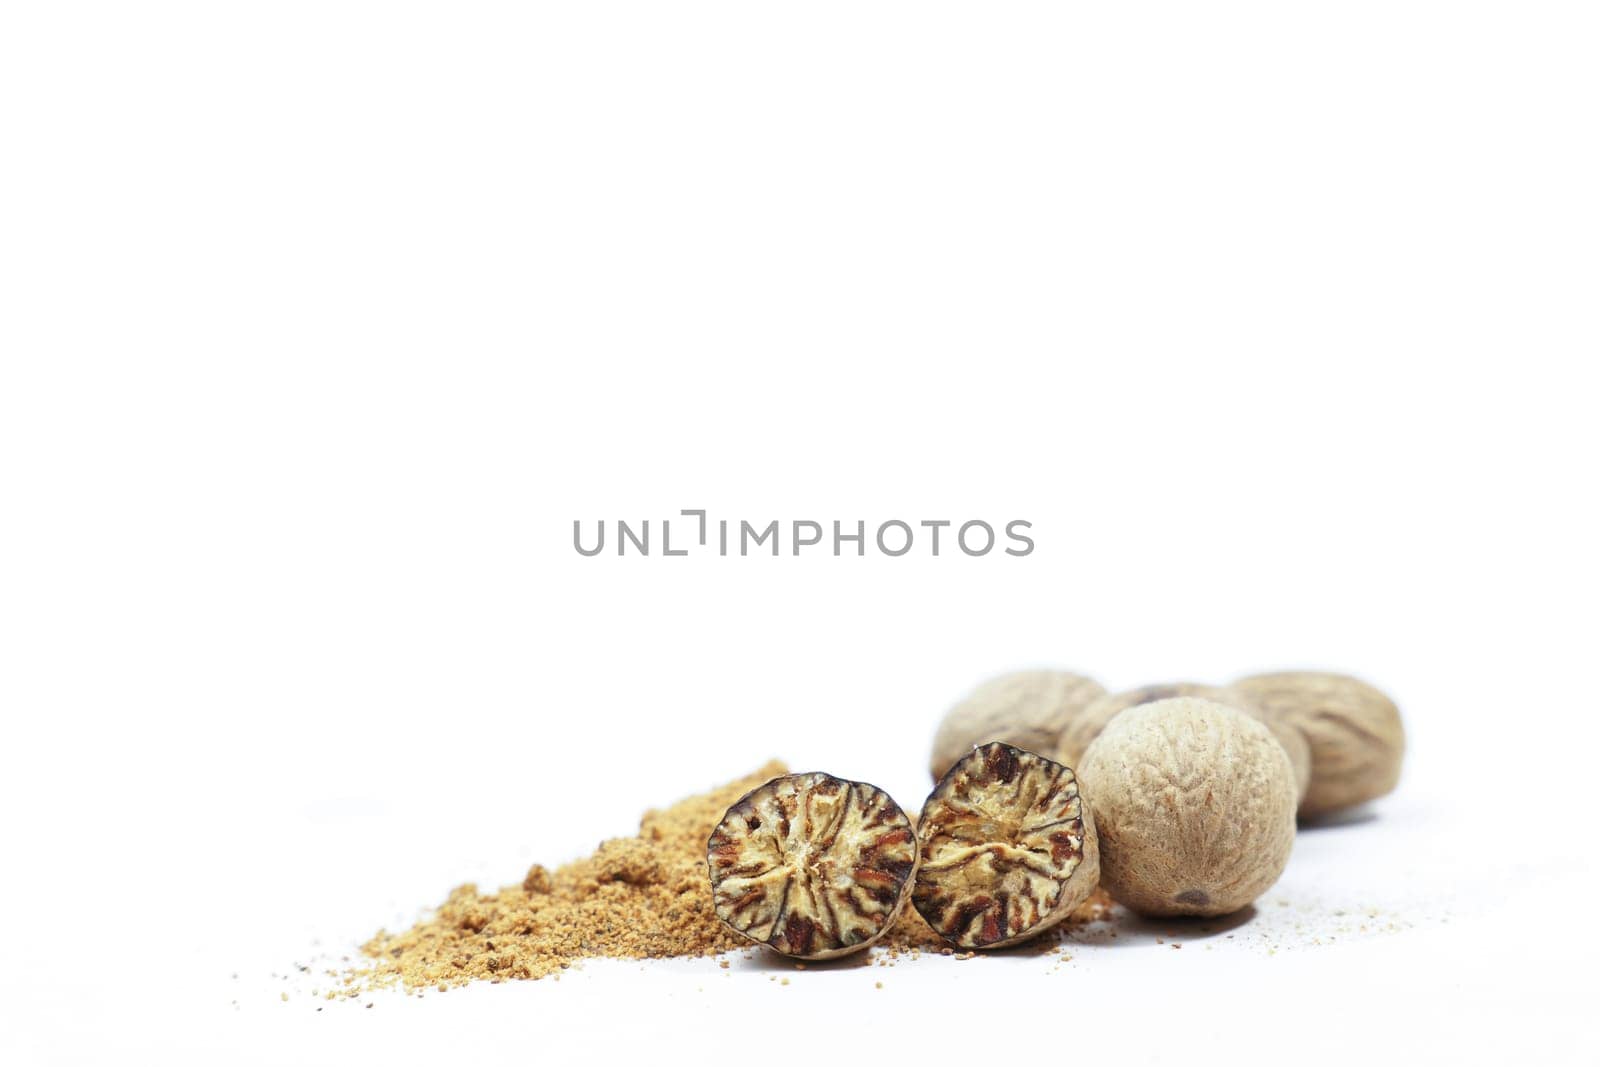 whole nutmeg, halved and ground, on a wooden spoon isolated on a white background and copy space